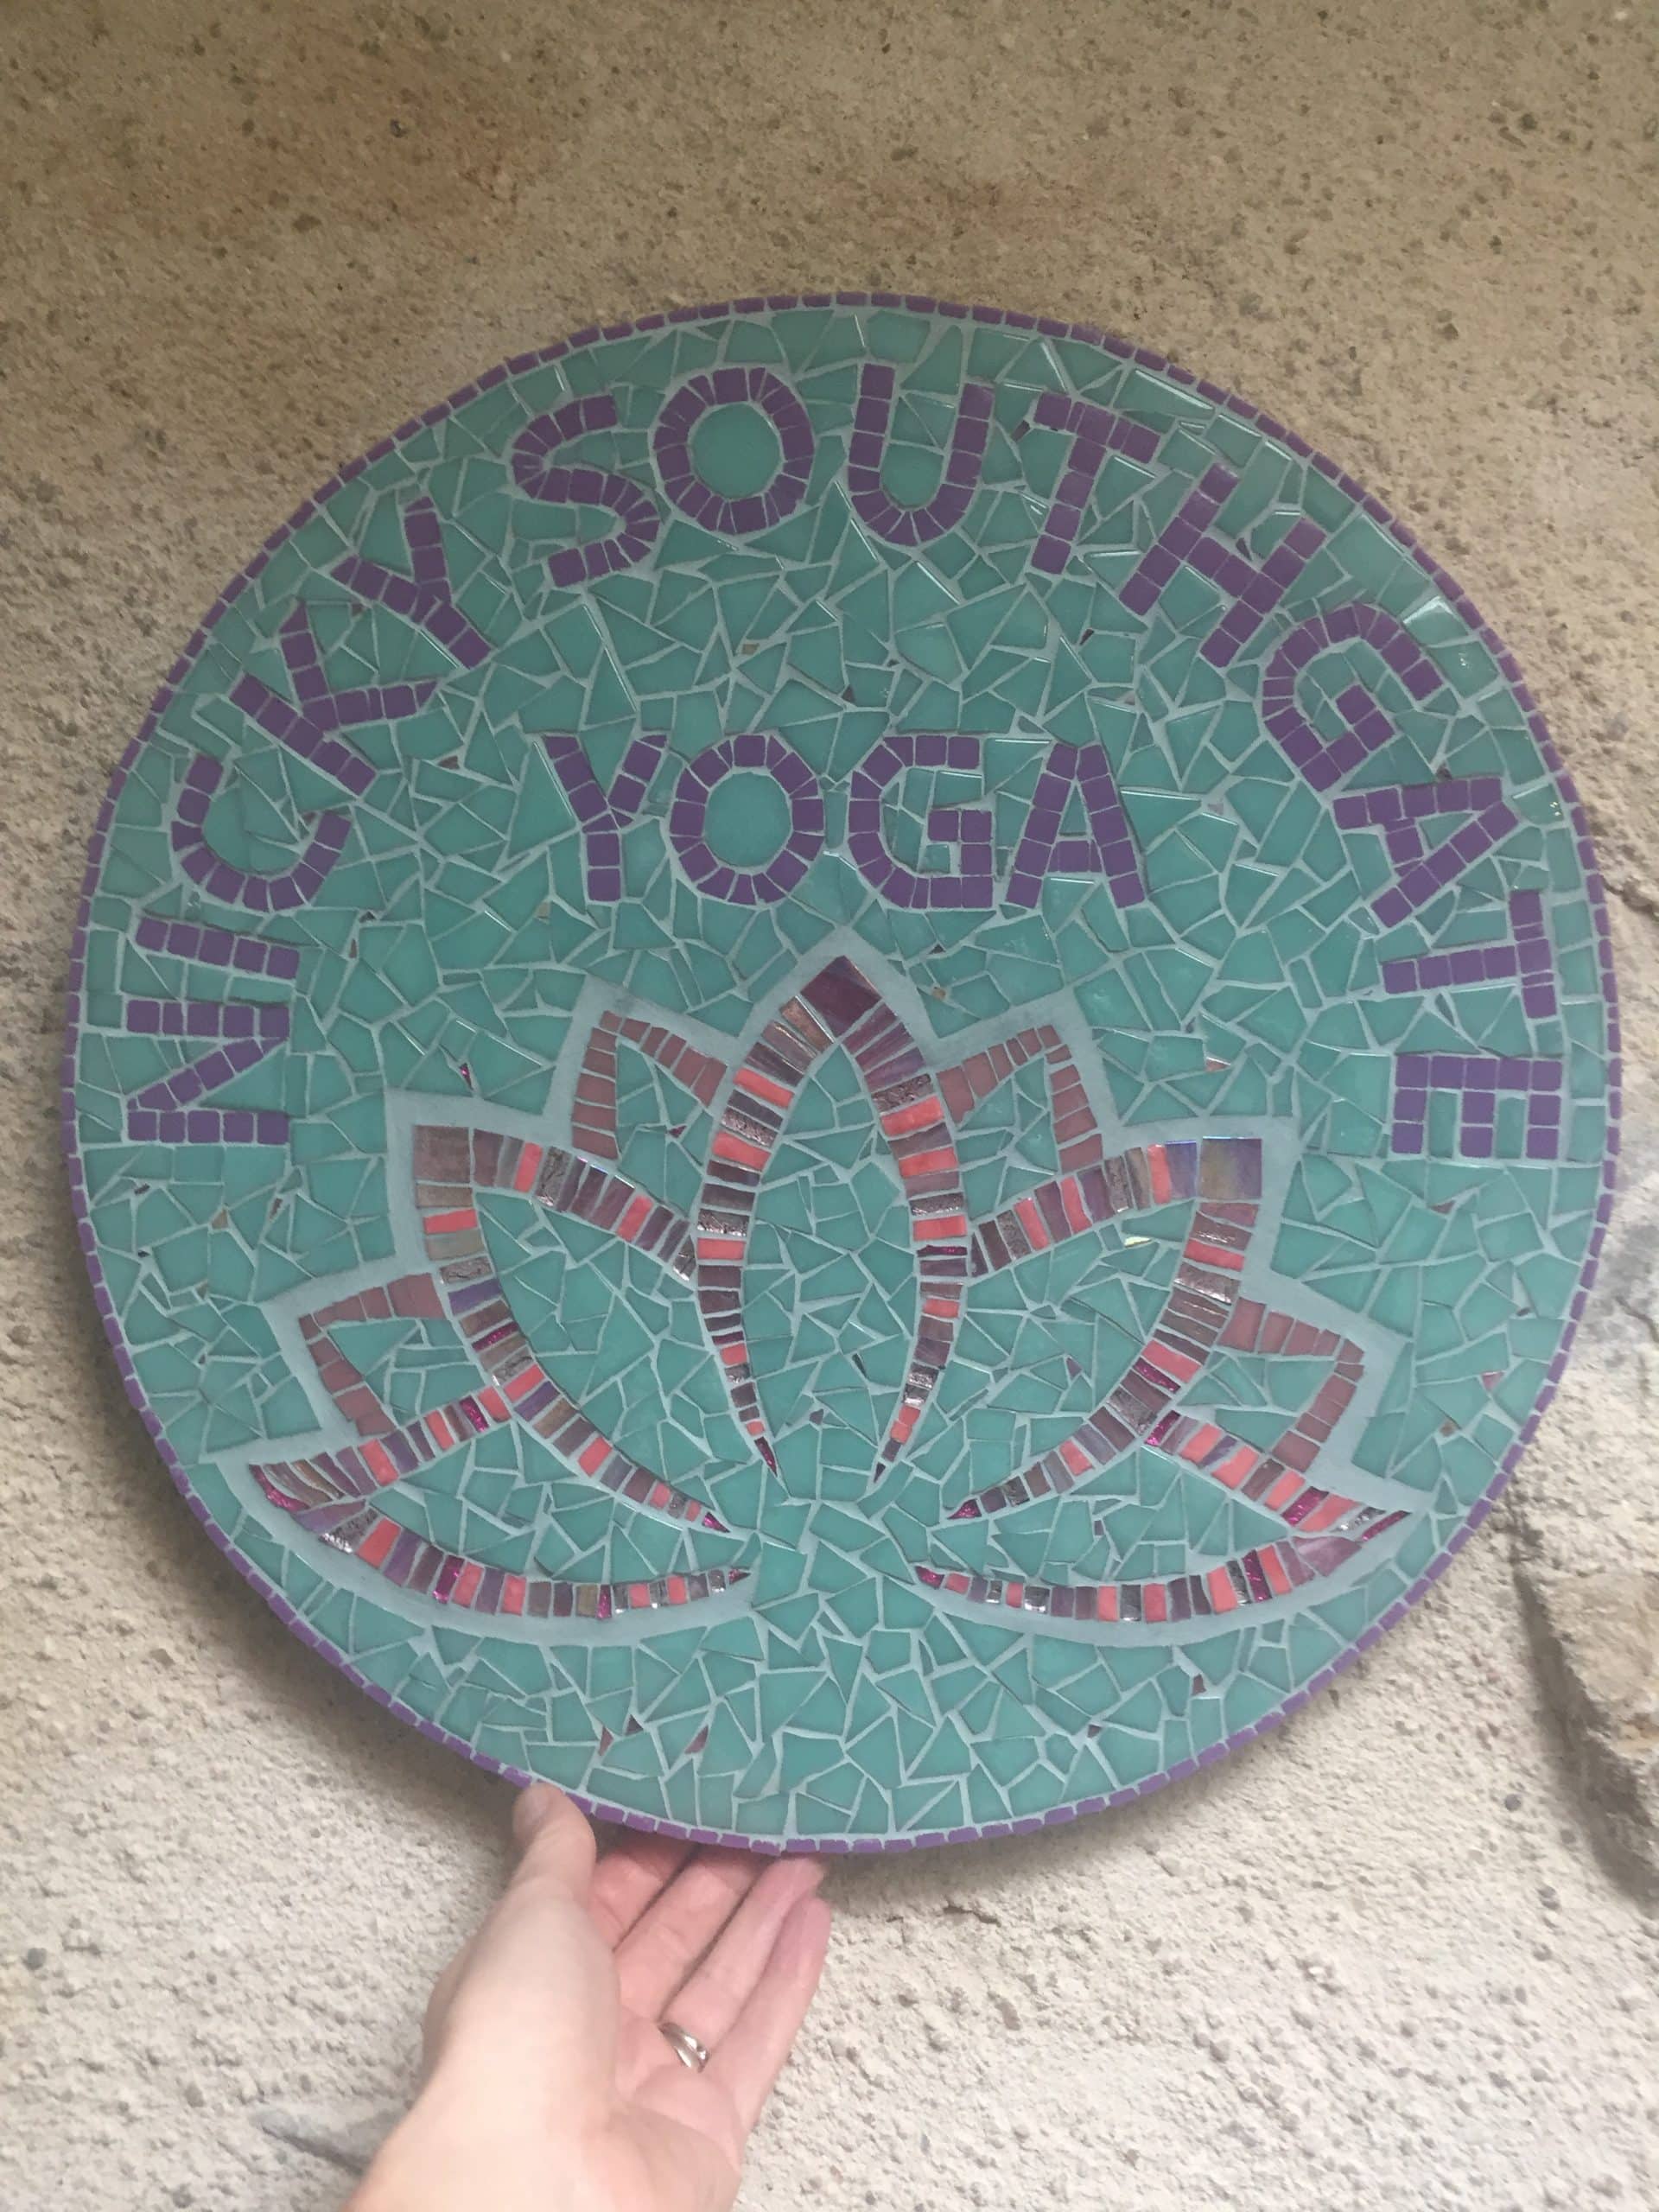 nicky southgate yoga business sign in mosaic